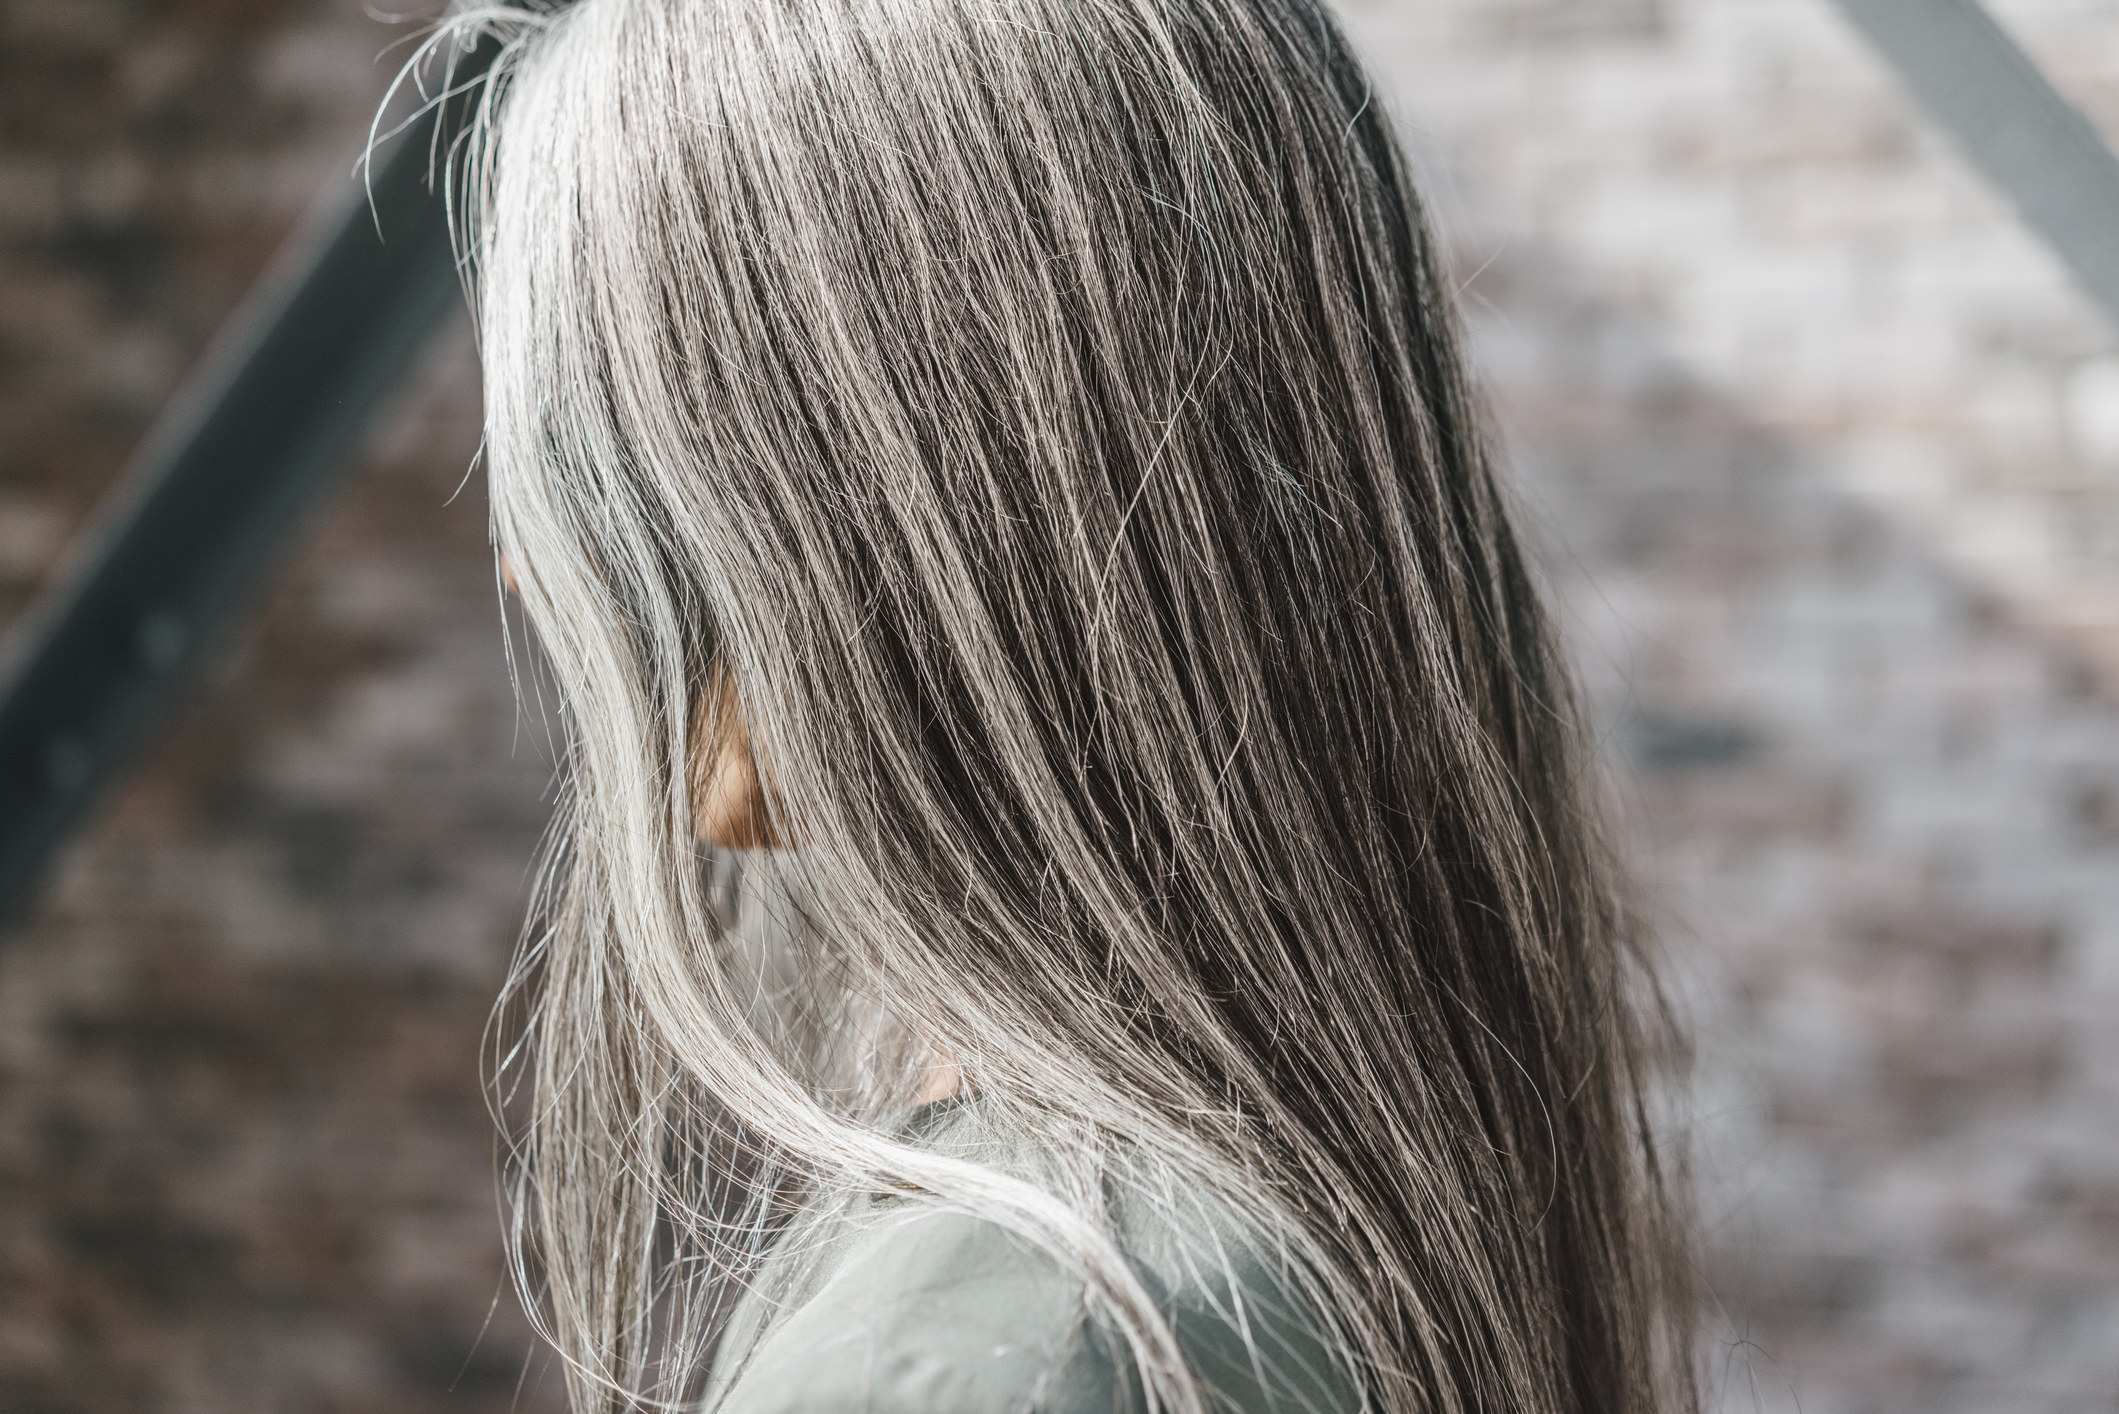 A woman with long gray hair